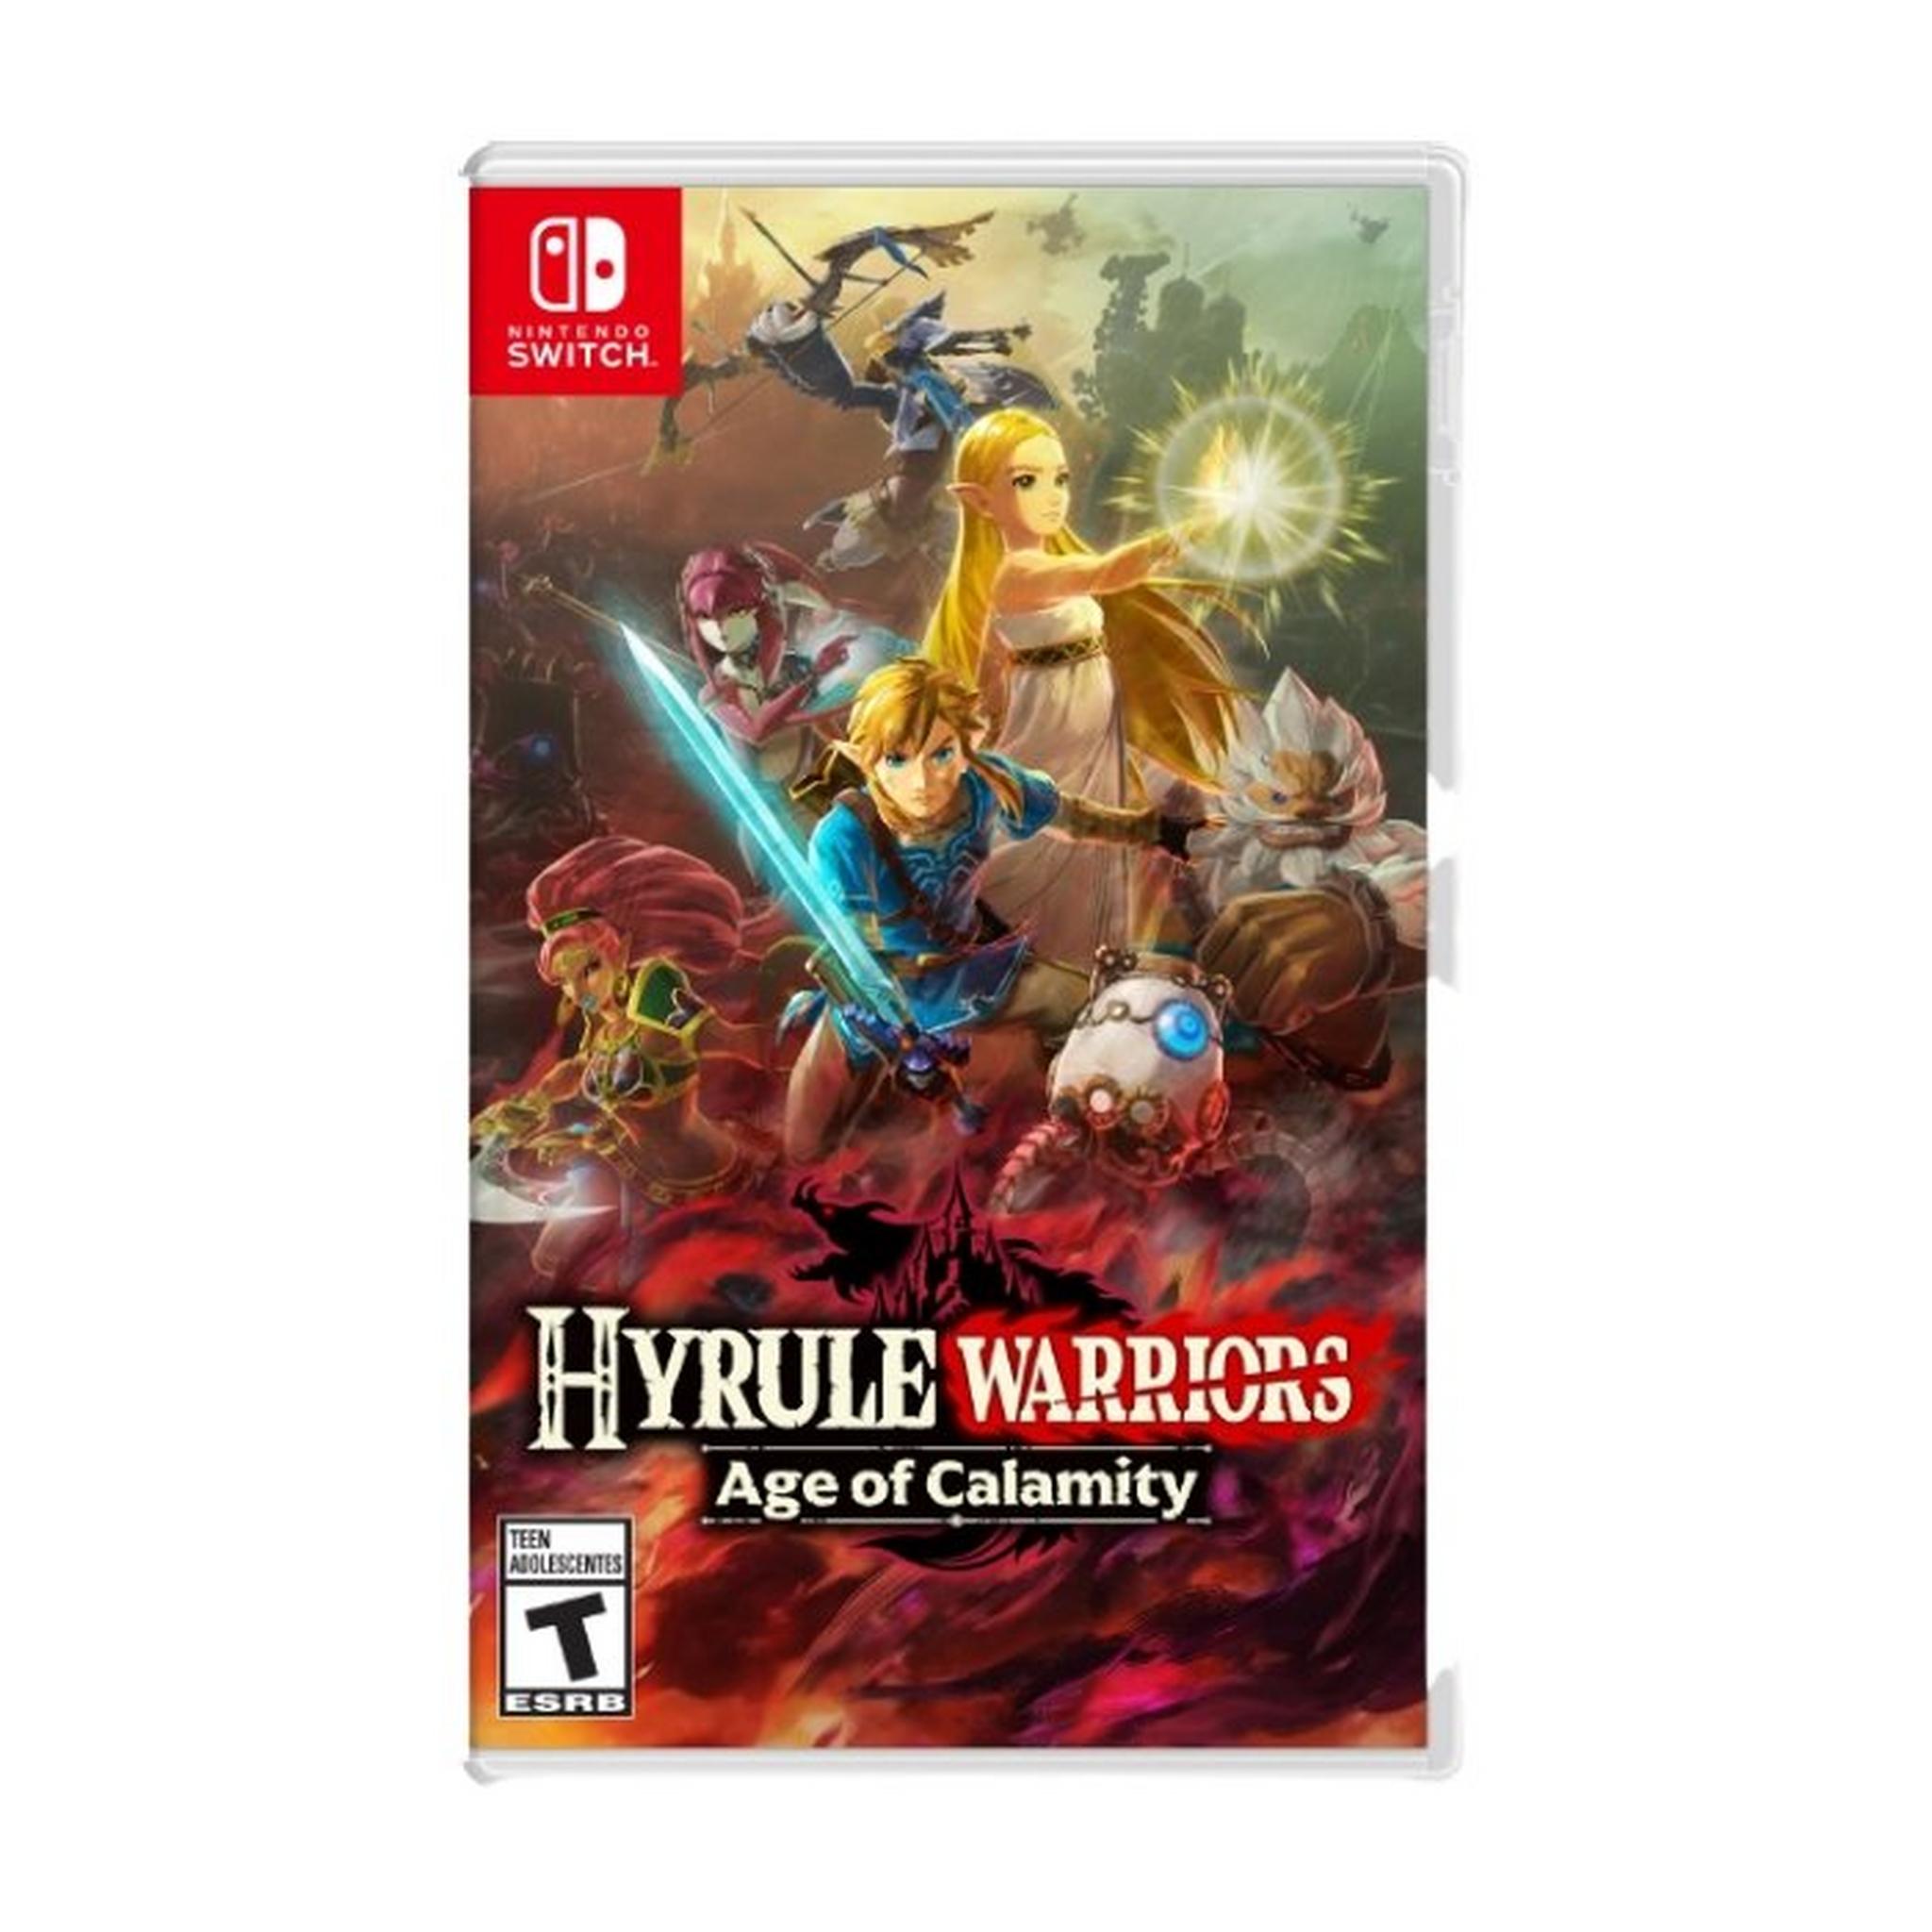 Hyrule Warriors: Age of Calamity - Nintendo Switch Game